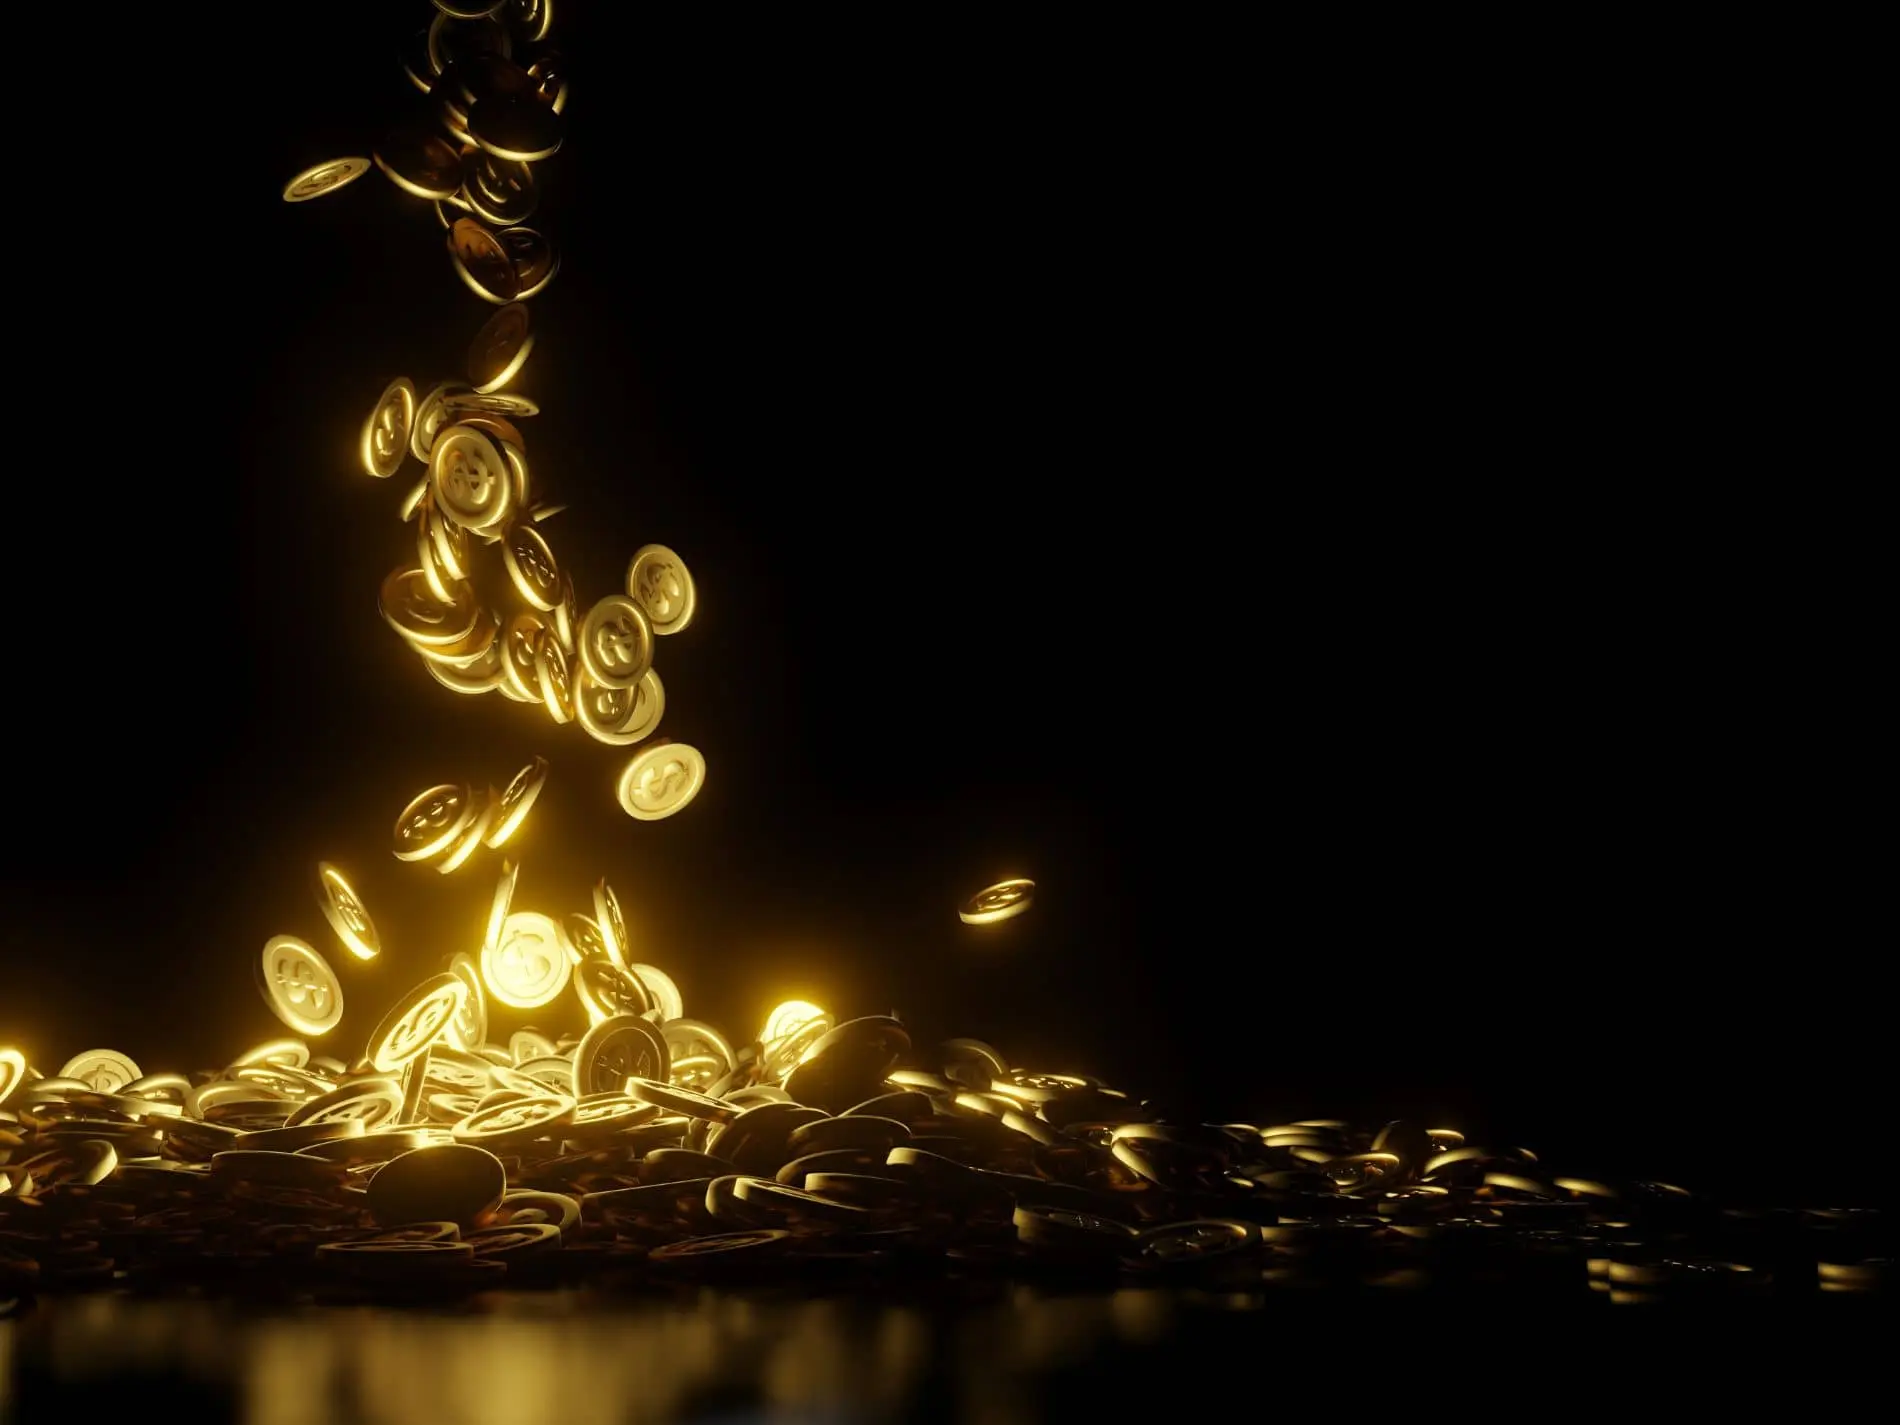 Gold coins on a black background